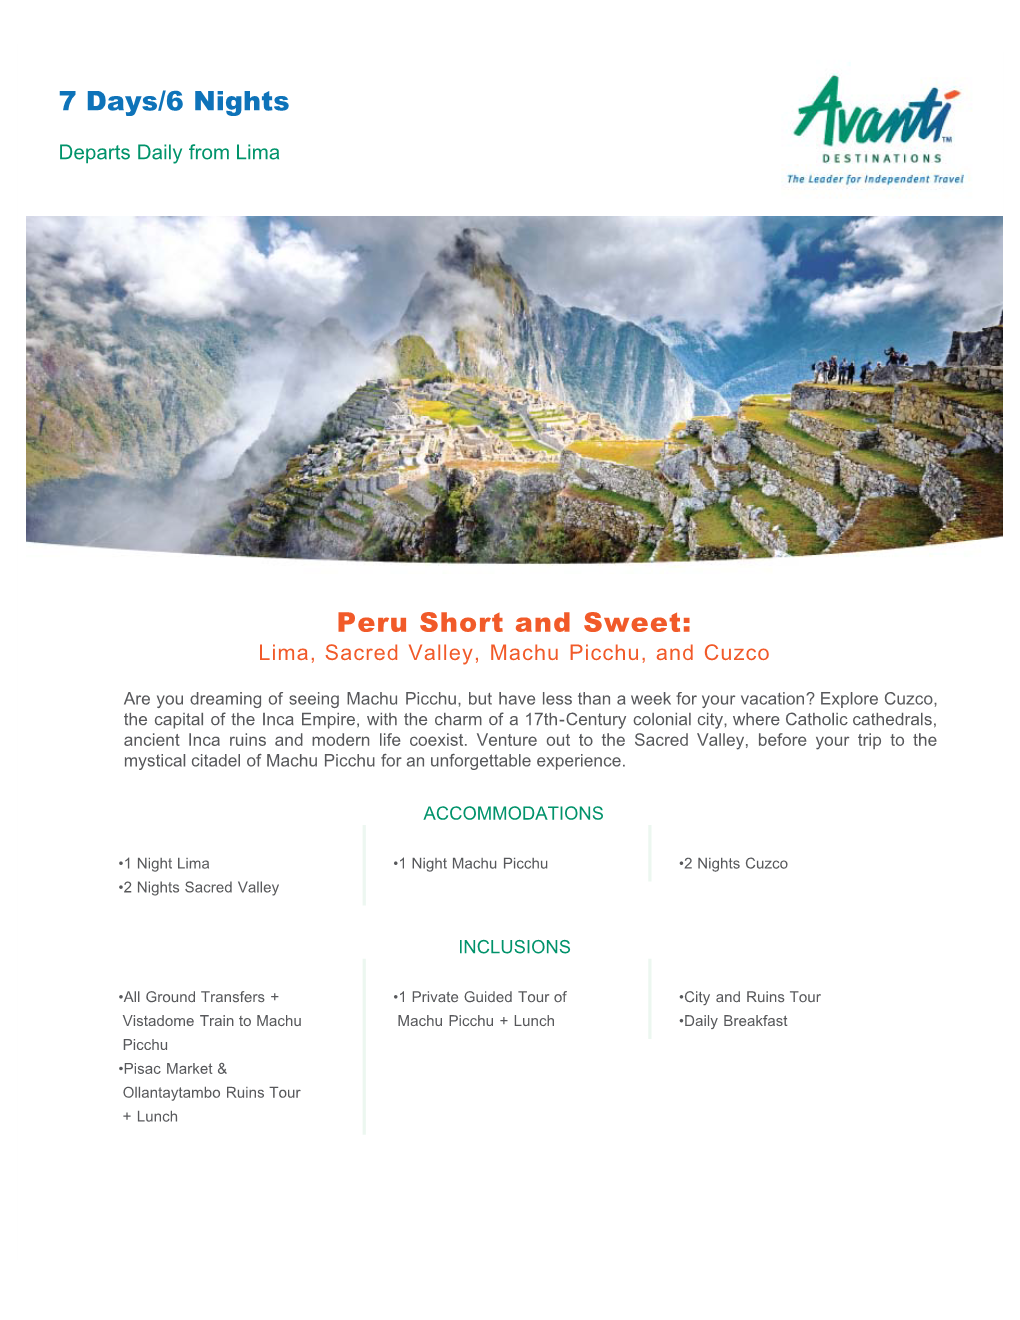 Peru Short and Sweet: Lima, Sacred Valley, Machu Picchu, and Cuzco